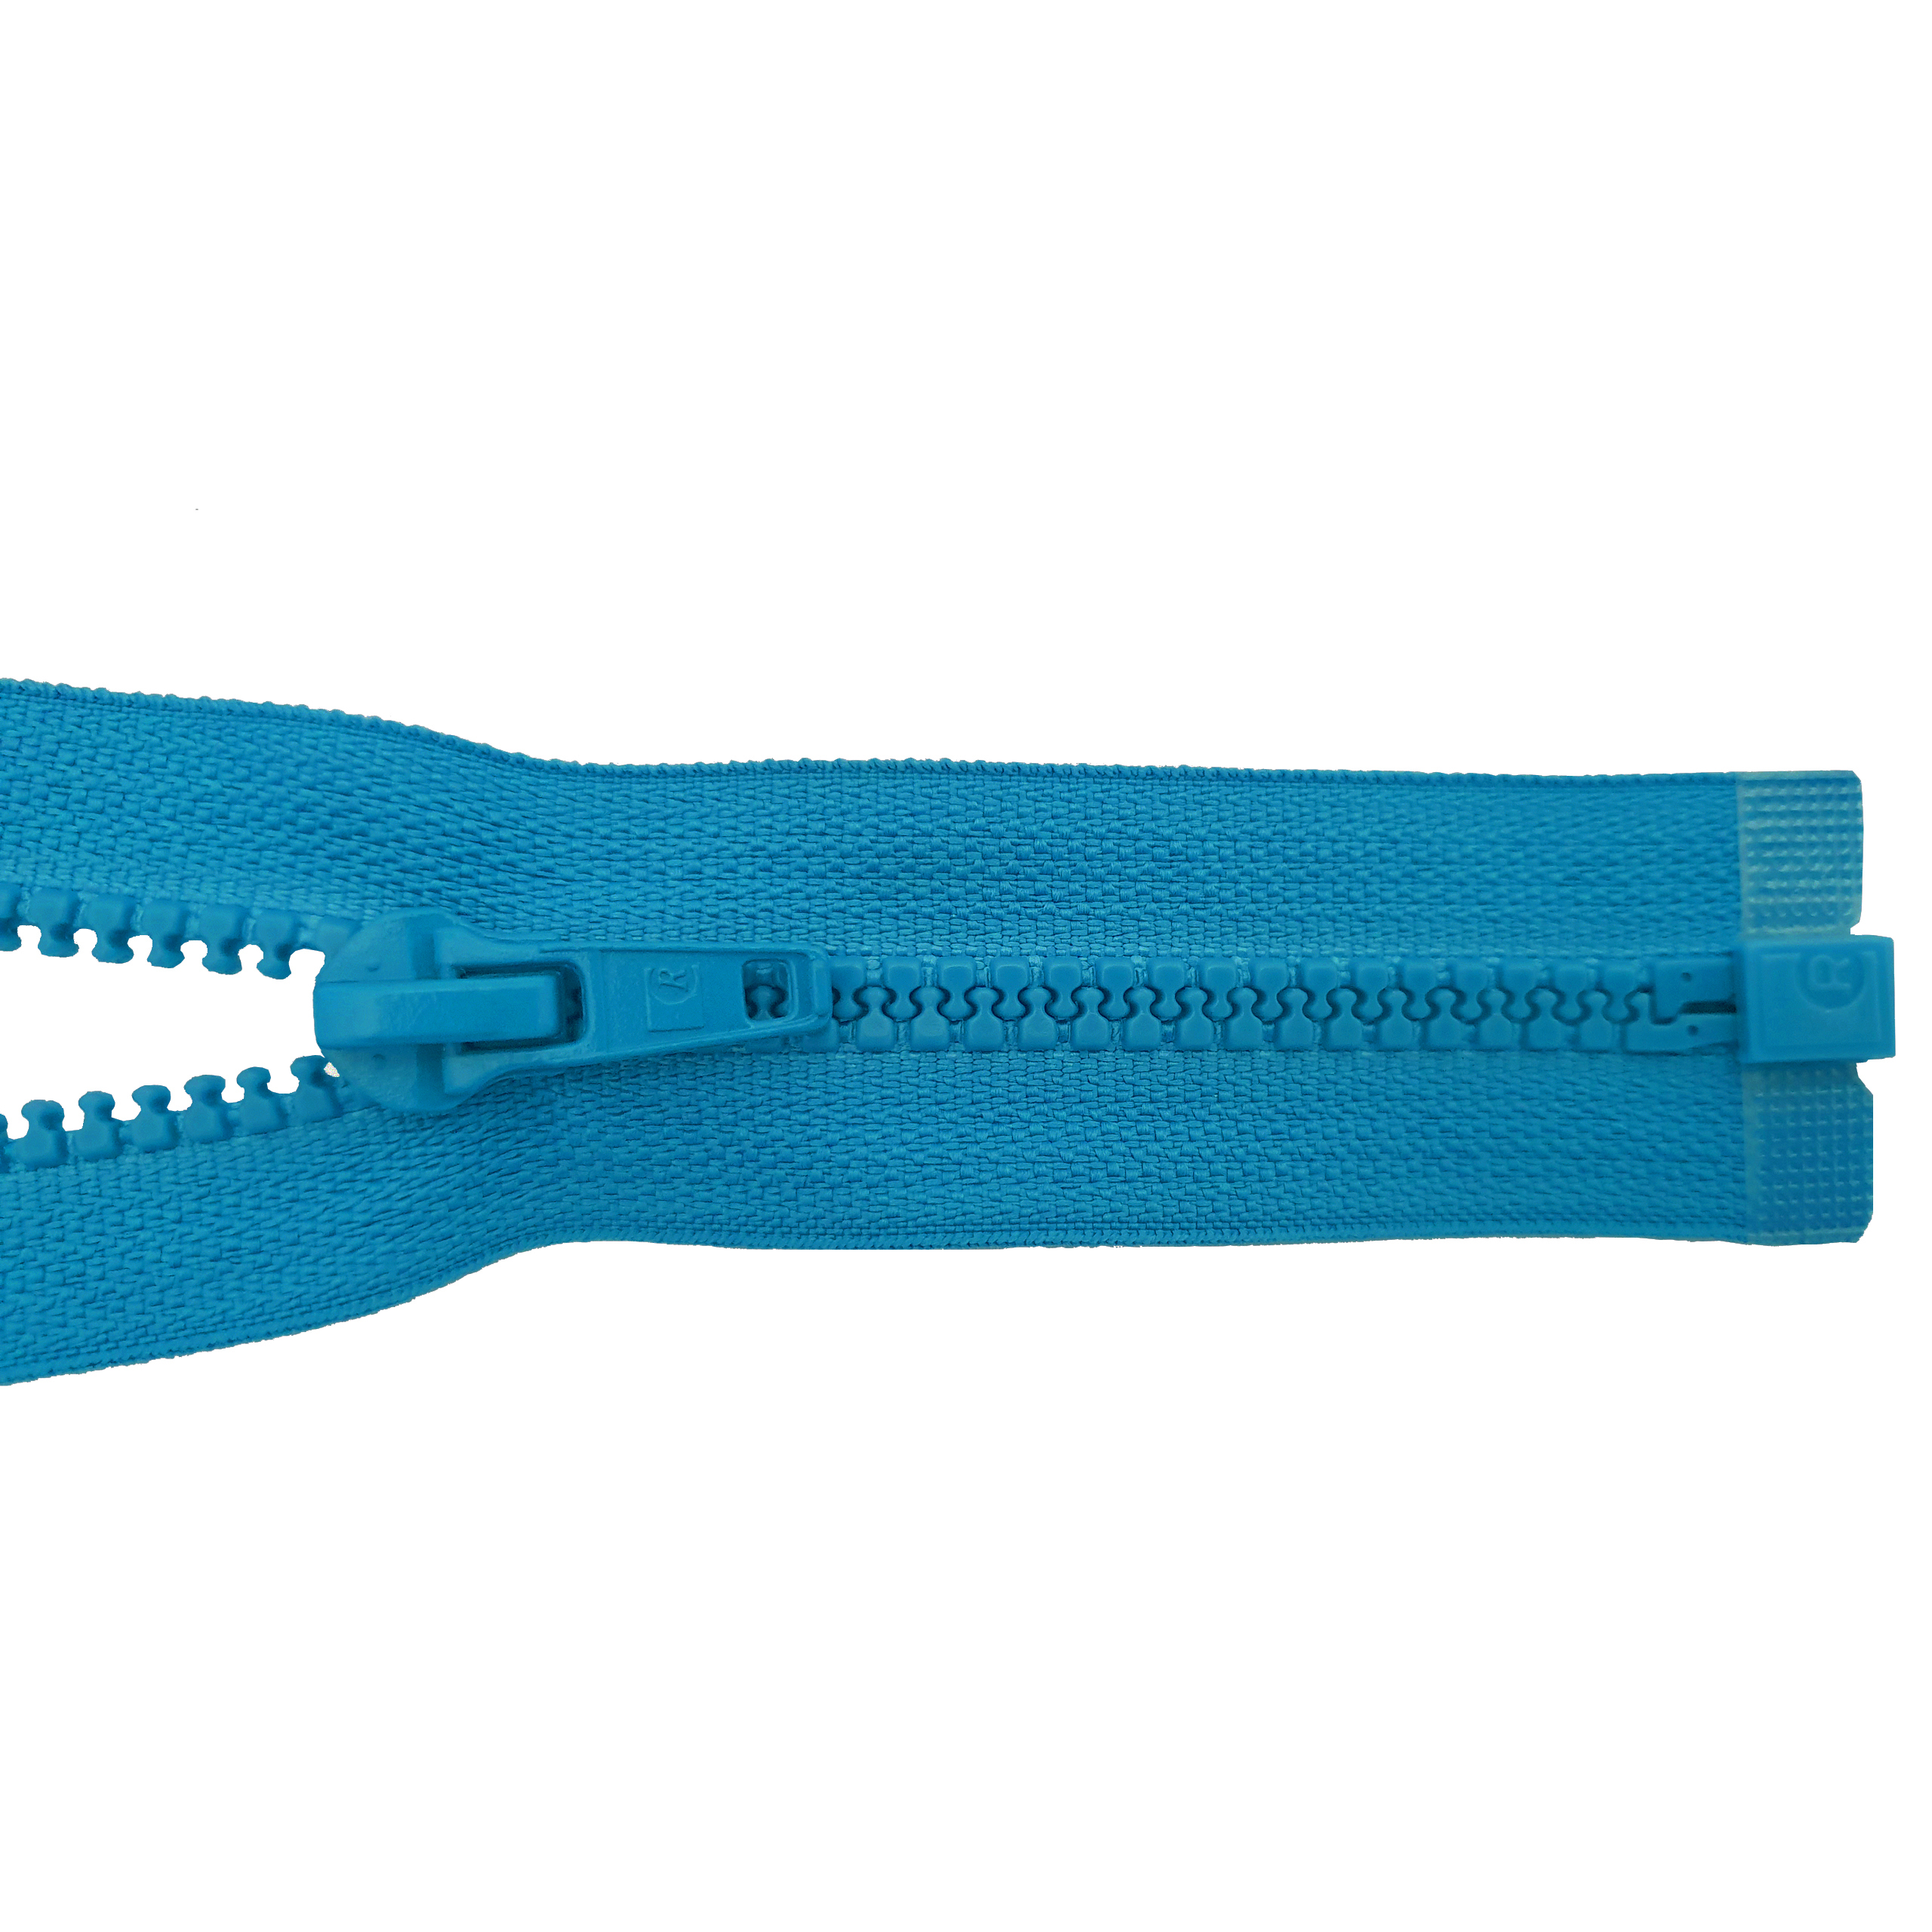 zipper 80cm,divisible, molded plastic, wide, turquoise